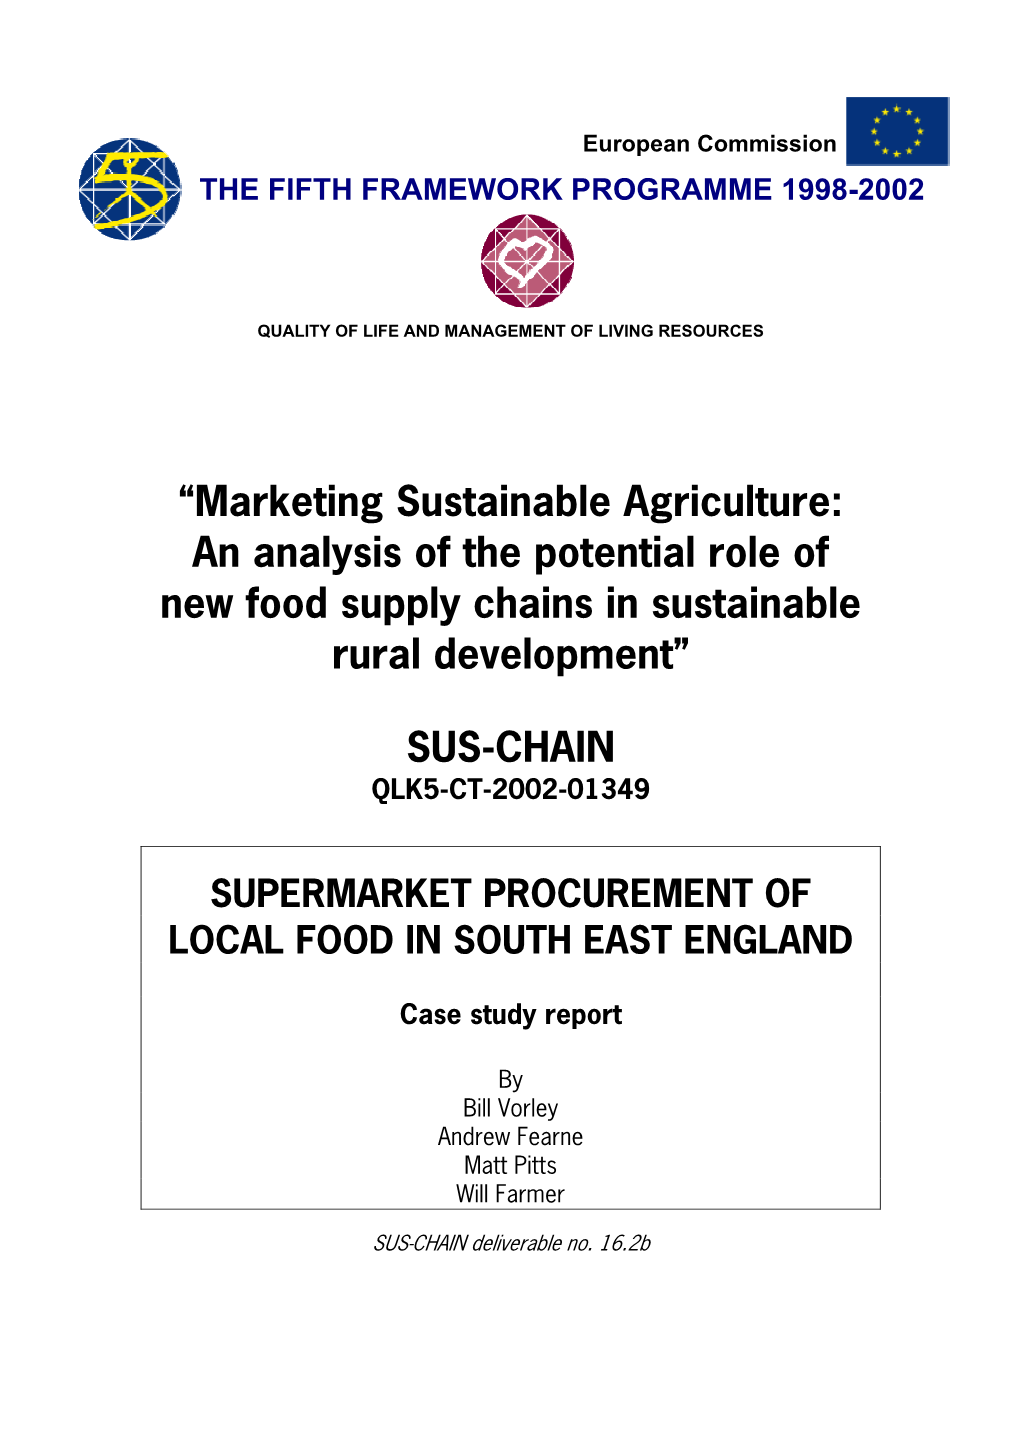 Marketing Sustainable Agriculture: an Analysis of the Potential Role of New Food Supply Chains in Sustainable Rural Development”